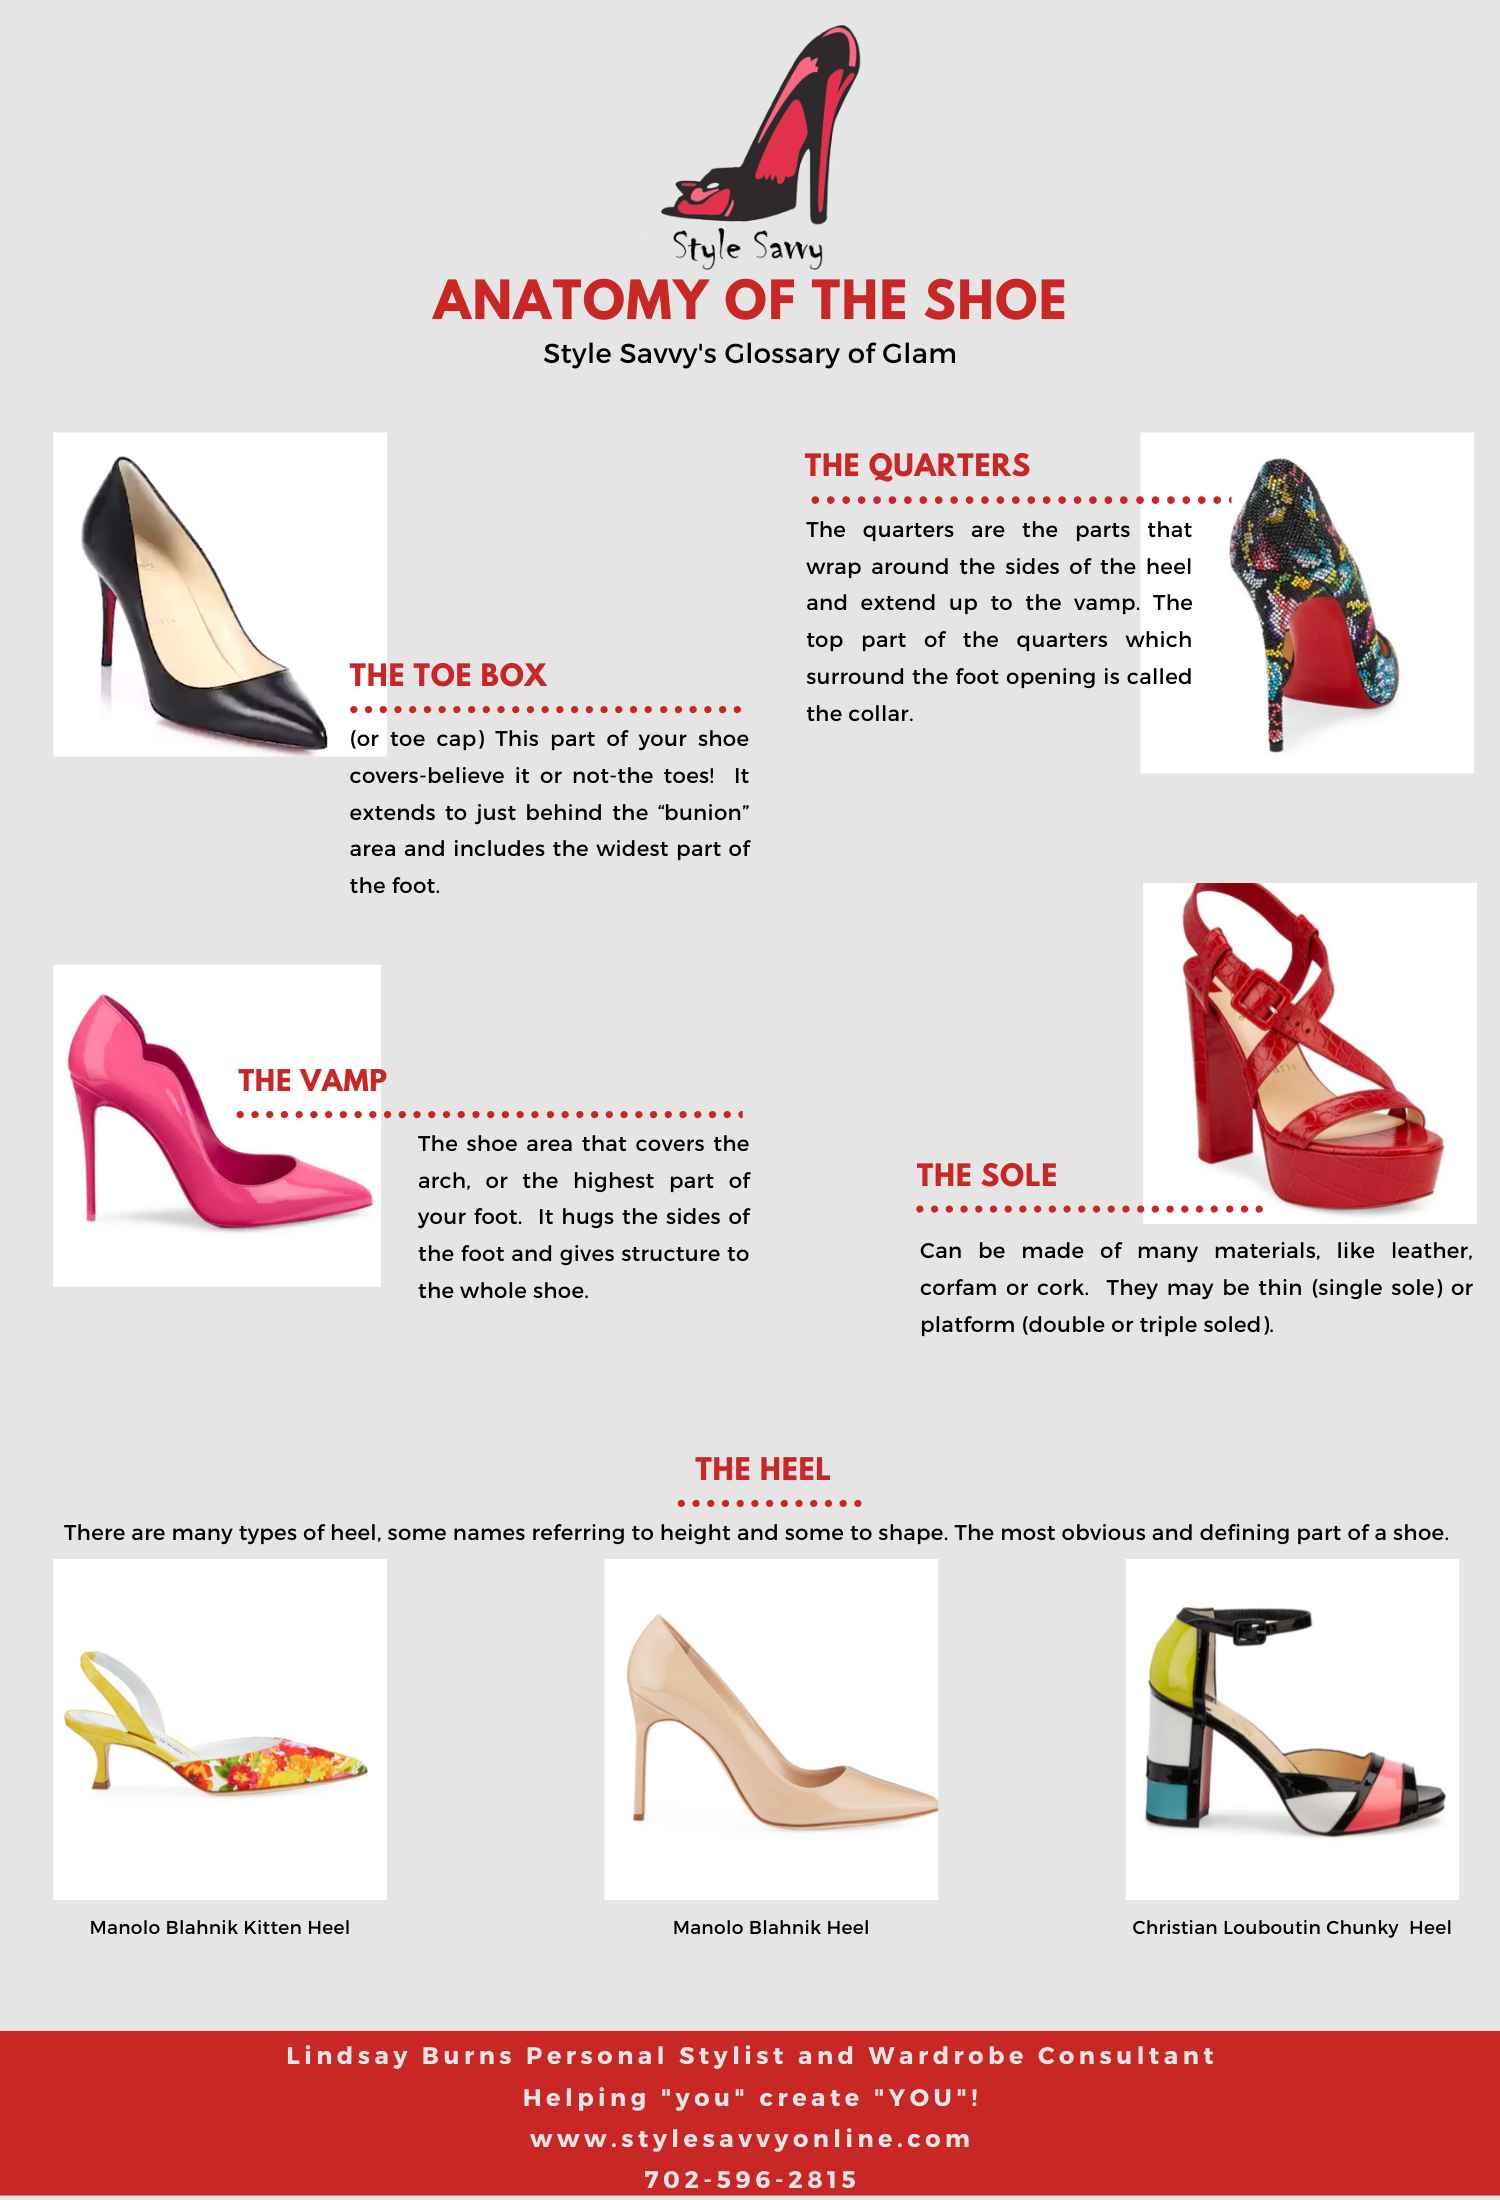 Outlook Glorious Dempsey Anatomy of a Shoe - Glossary of Glam — Style Savvy